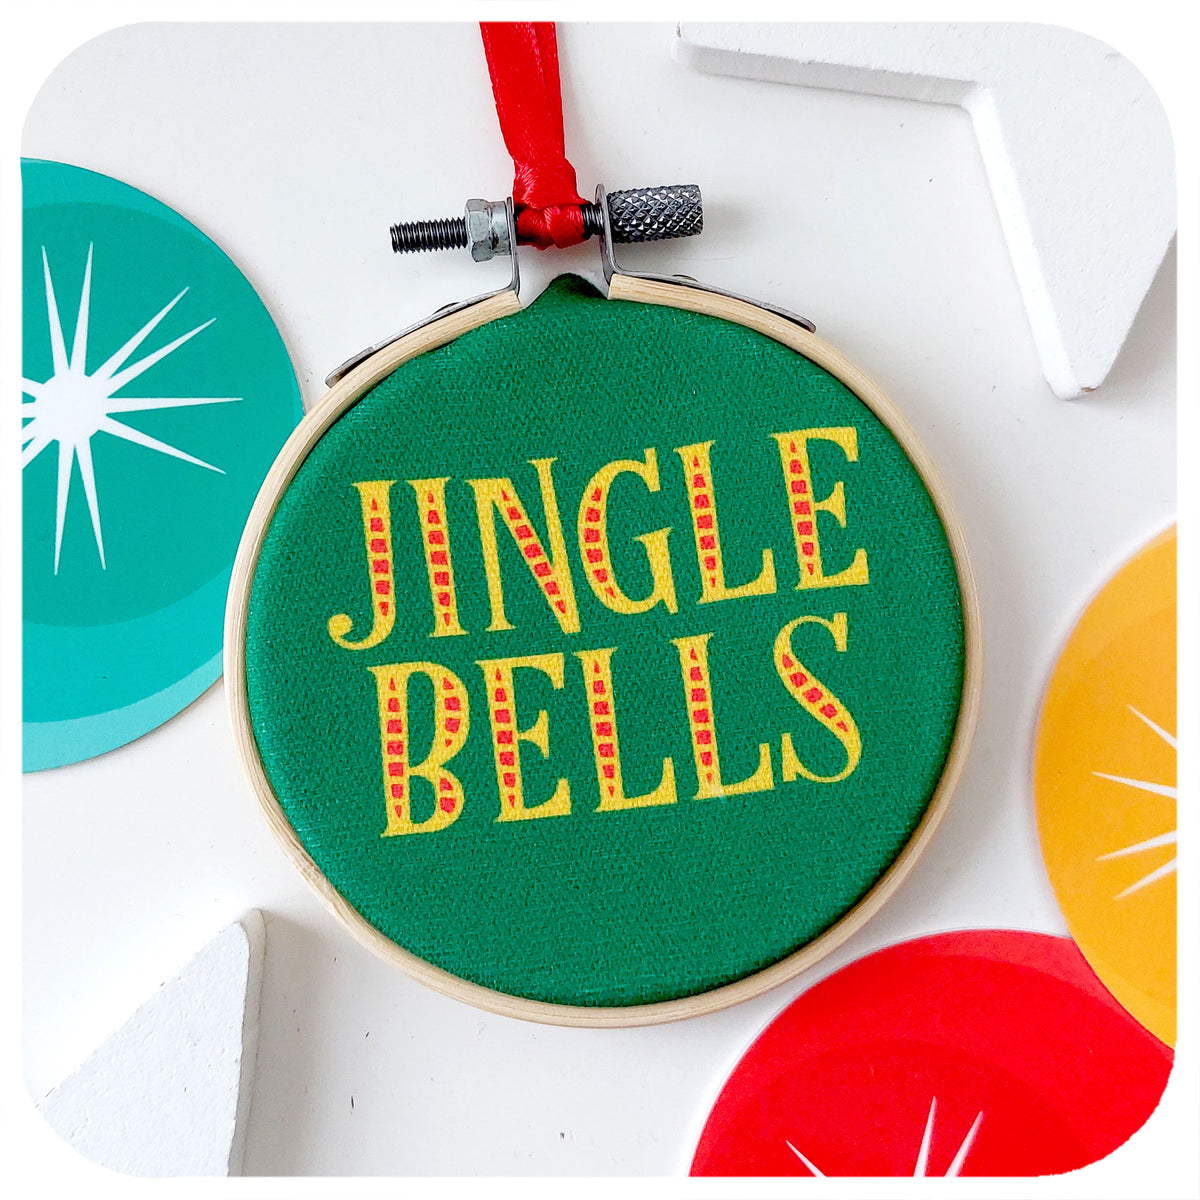 A printed fabric retro style Christmas tree decoration on a white background surrounded by colourful Christmas decorations. Text on bauble reads: Jingle Bells